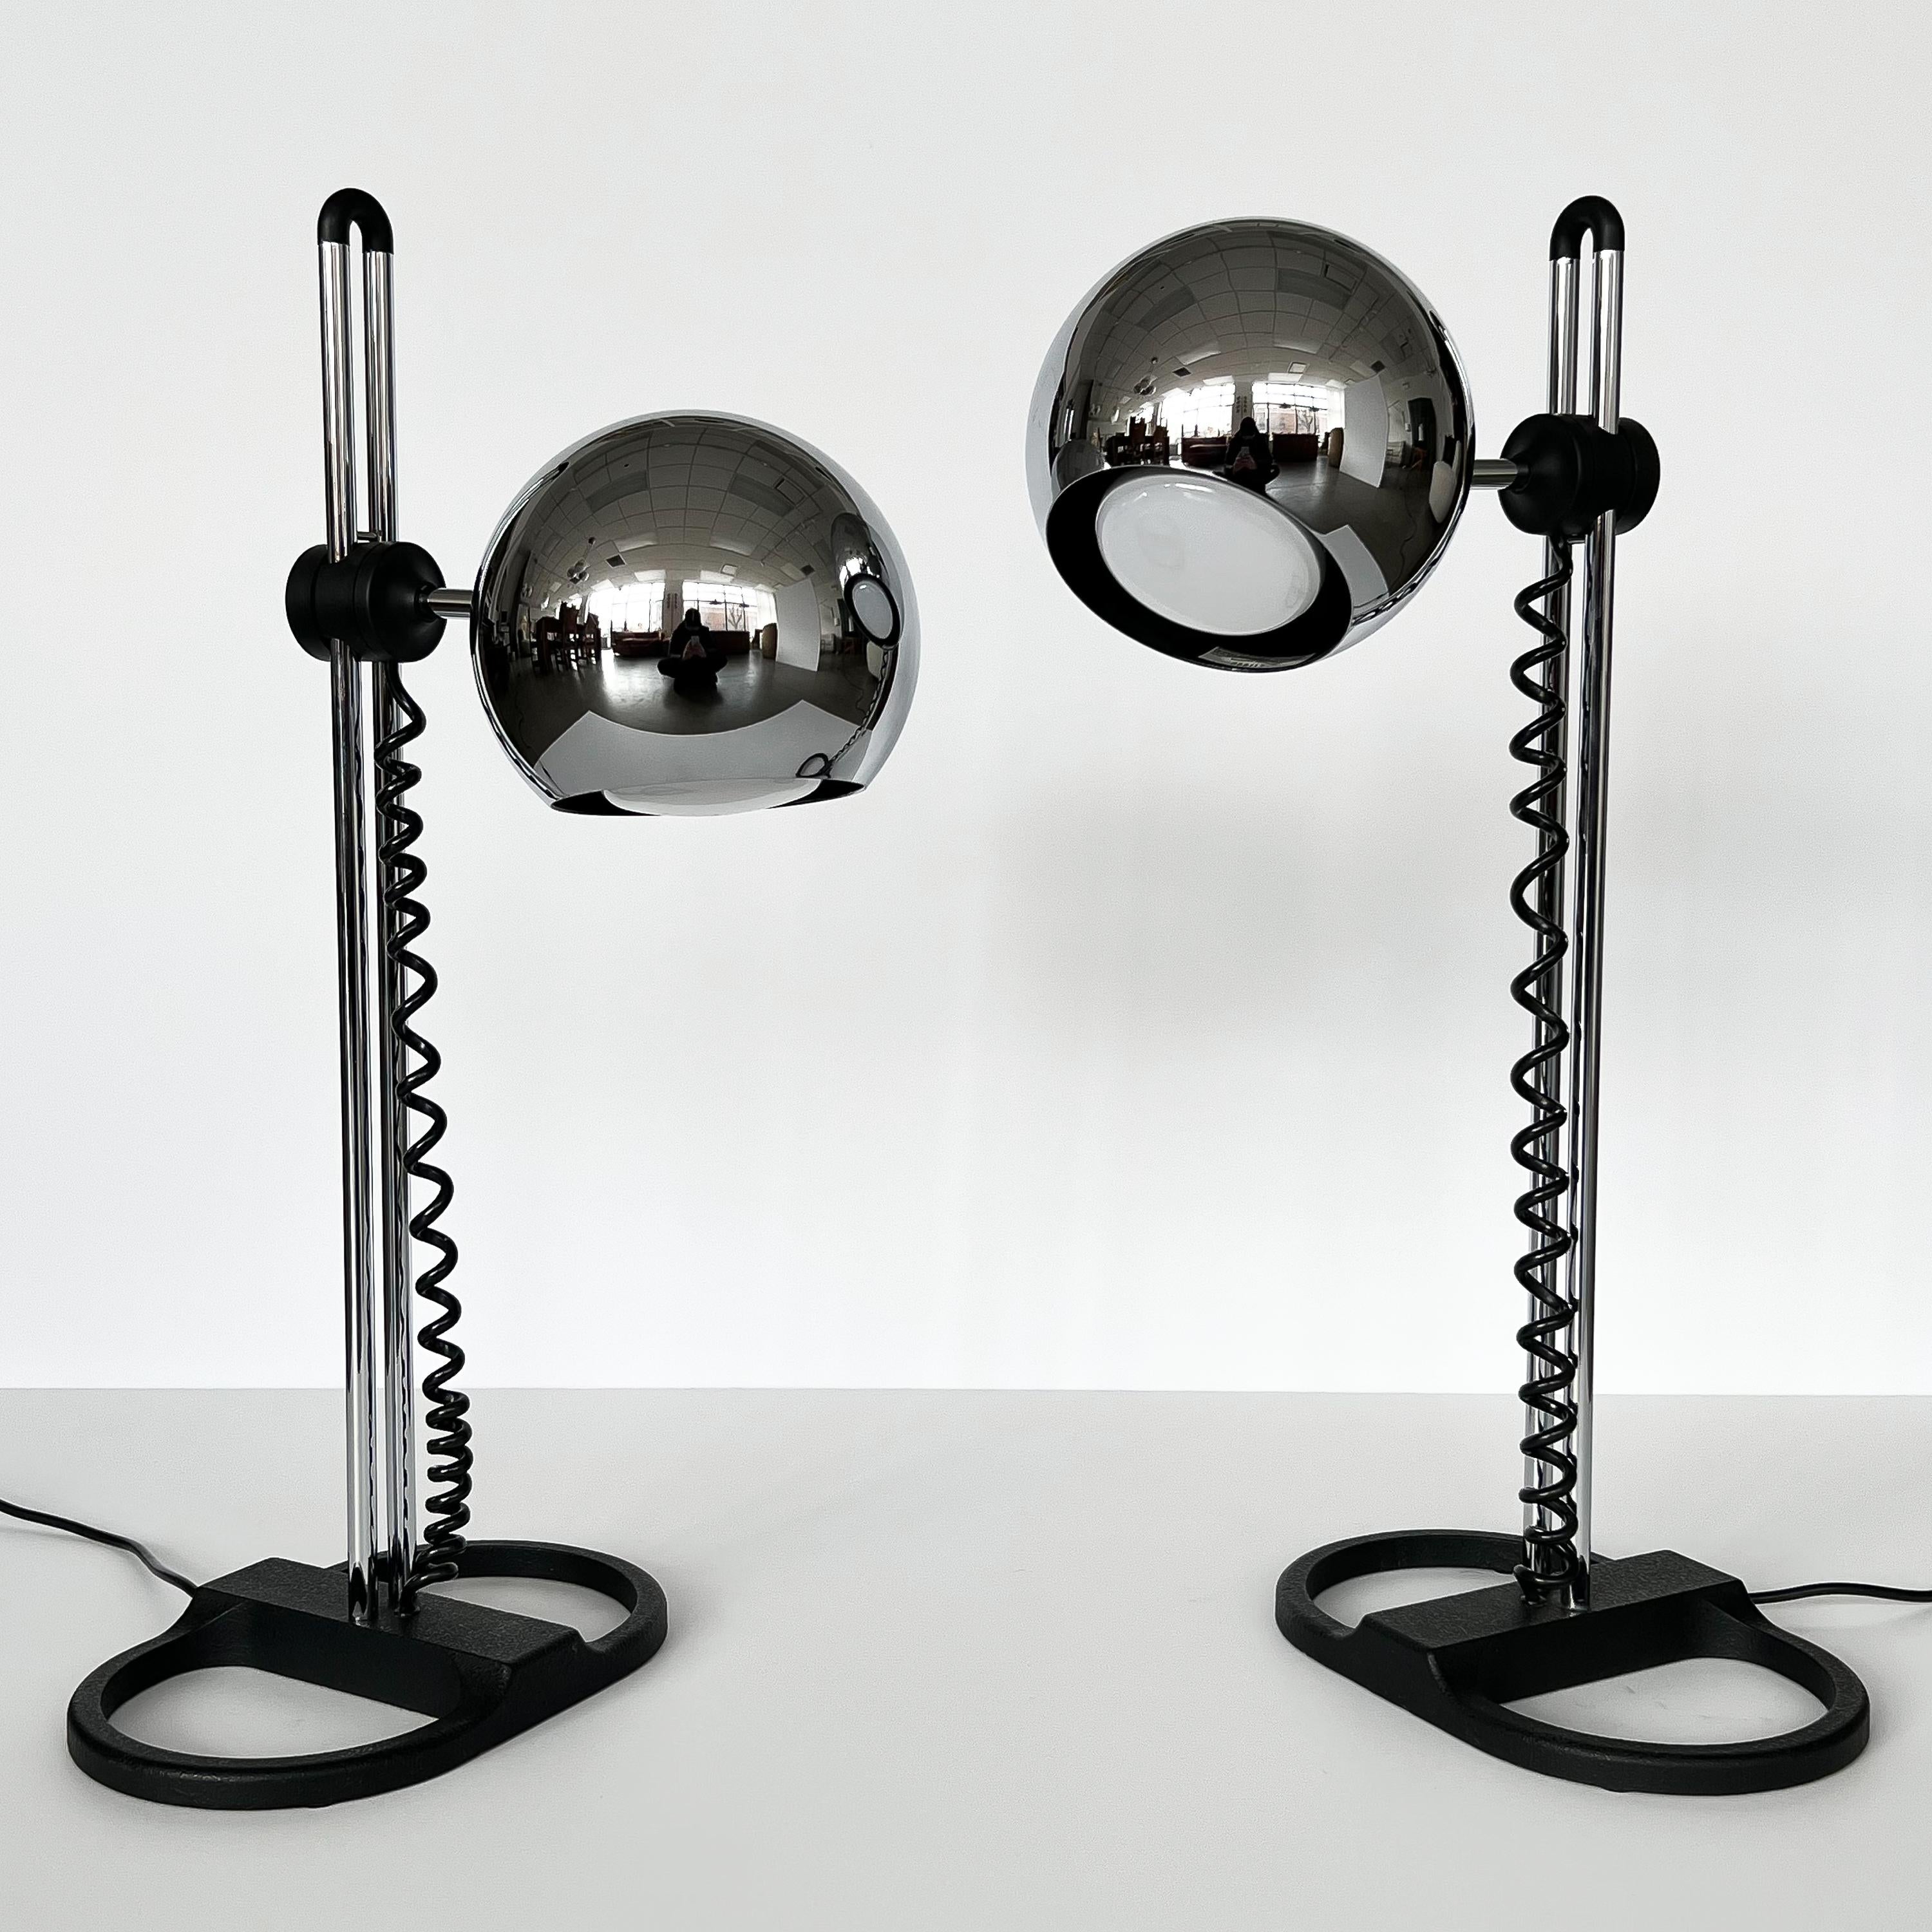 Pair of Staff Leuchten chrome adjustable eyeball table lamps, Germany circa 1970s. These lamps feature 7